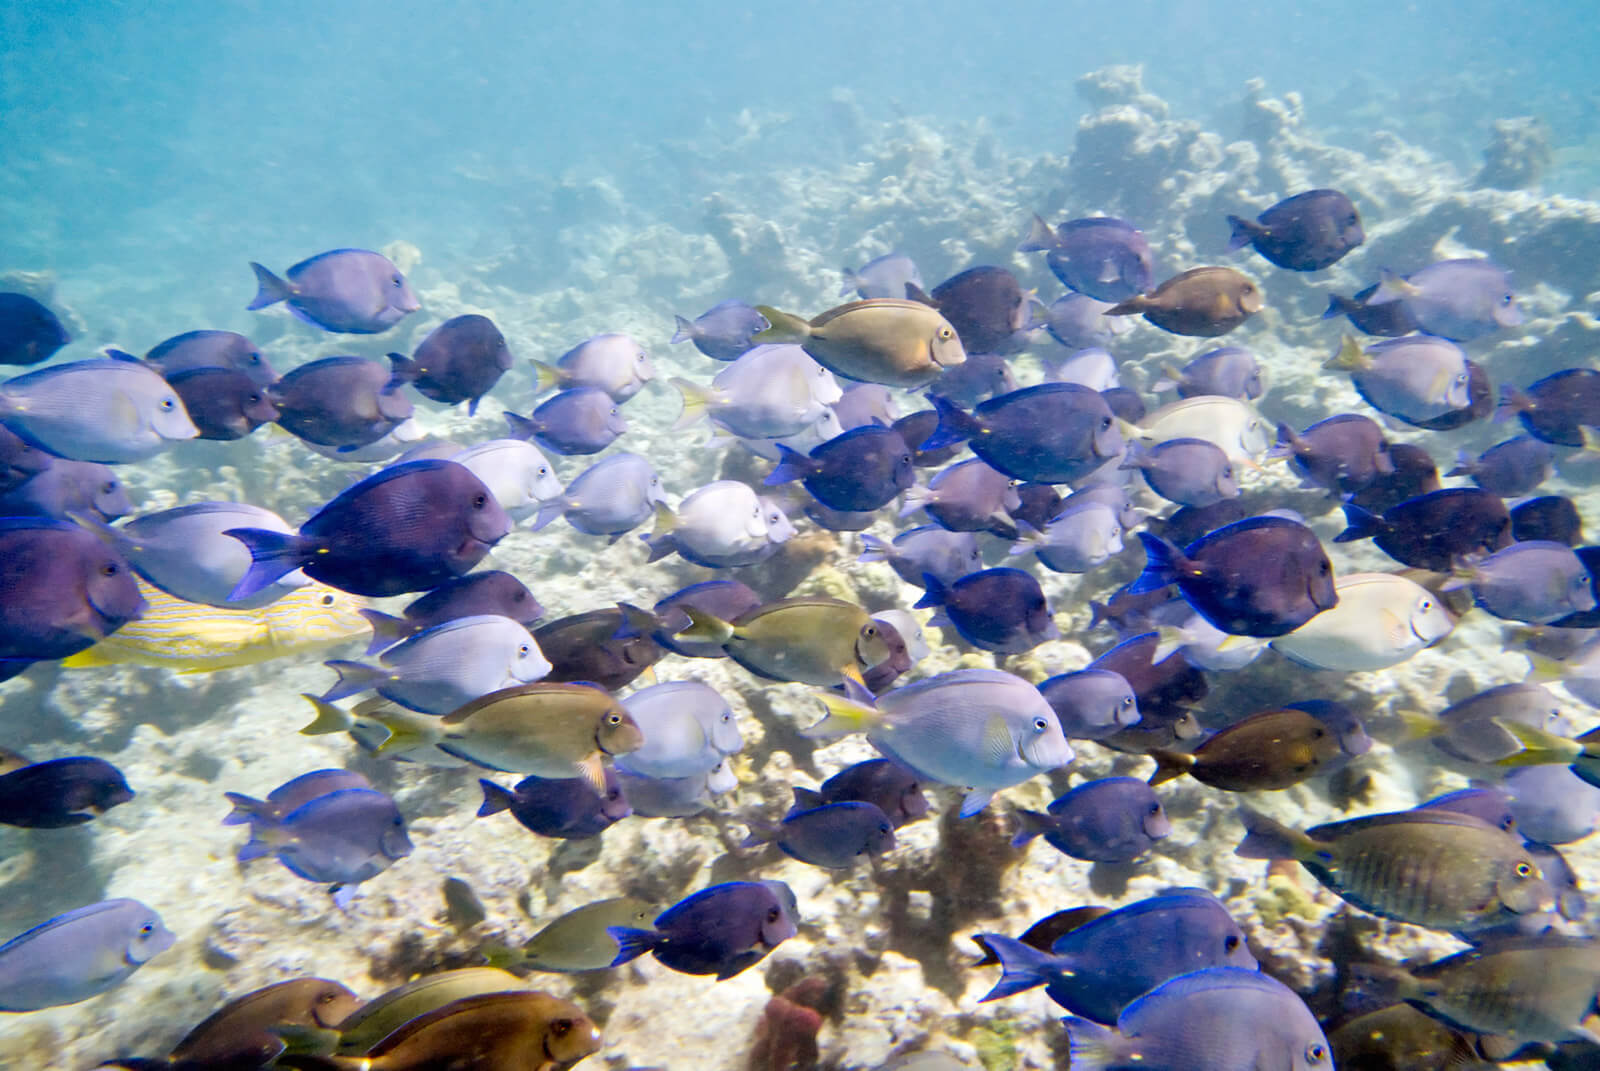 Snorkeling offers many sights